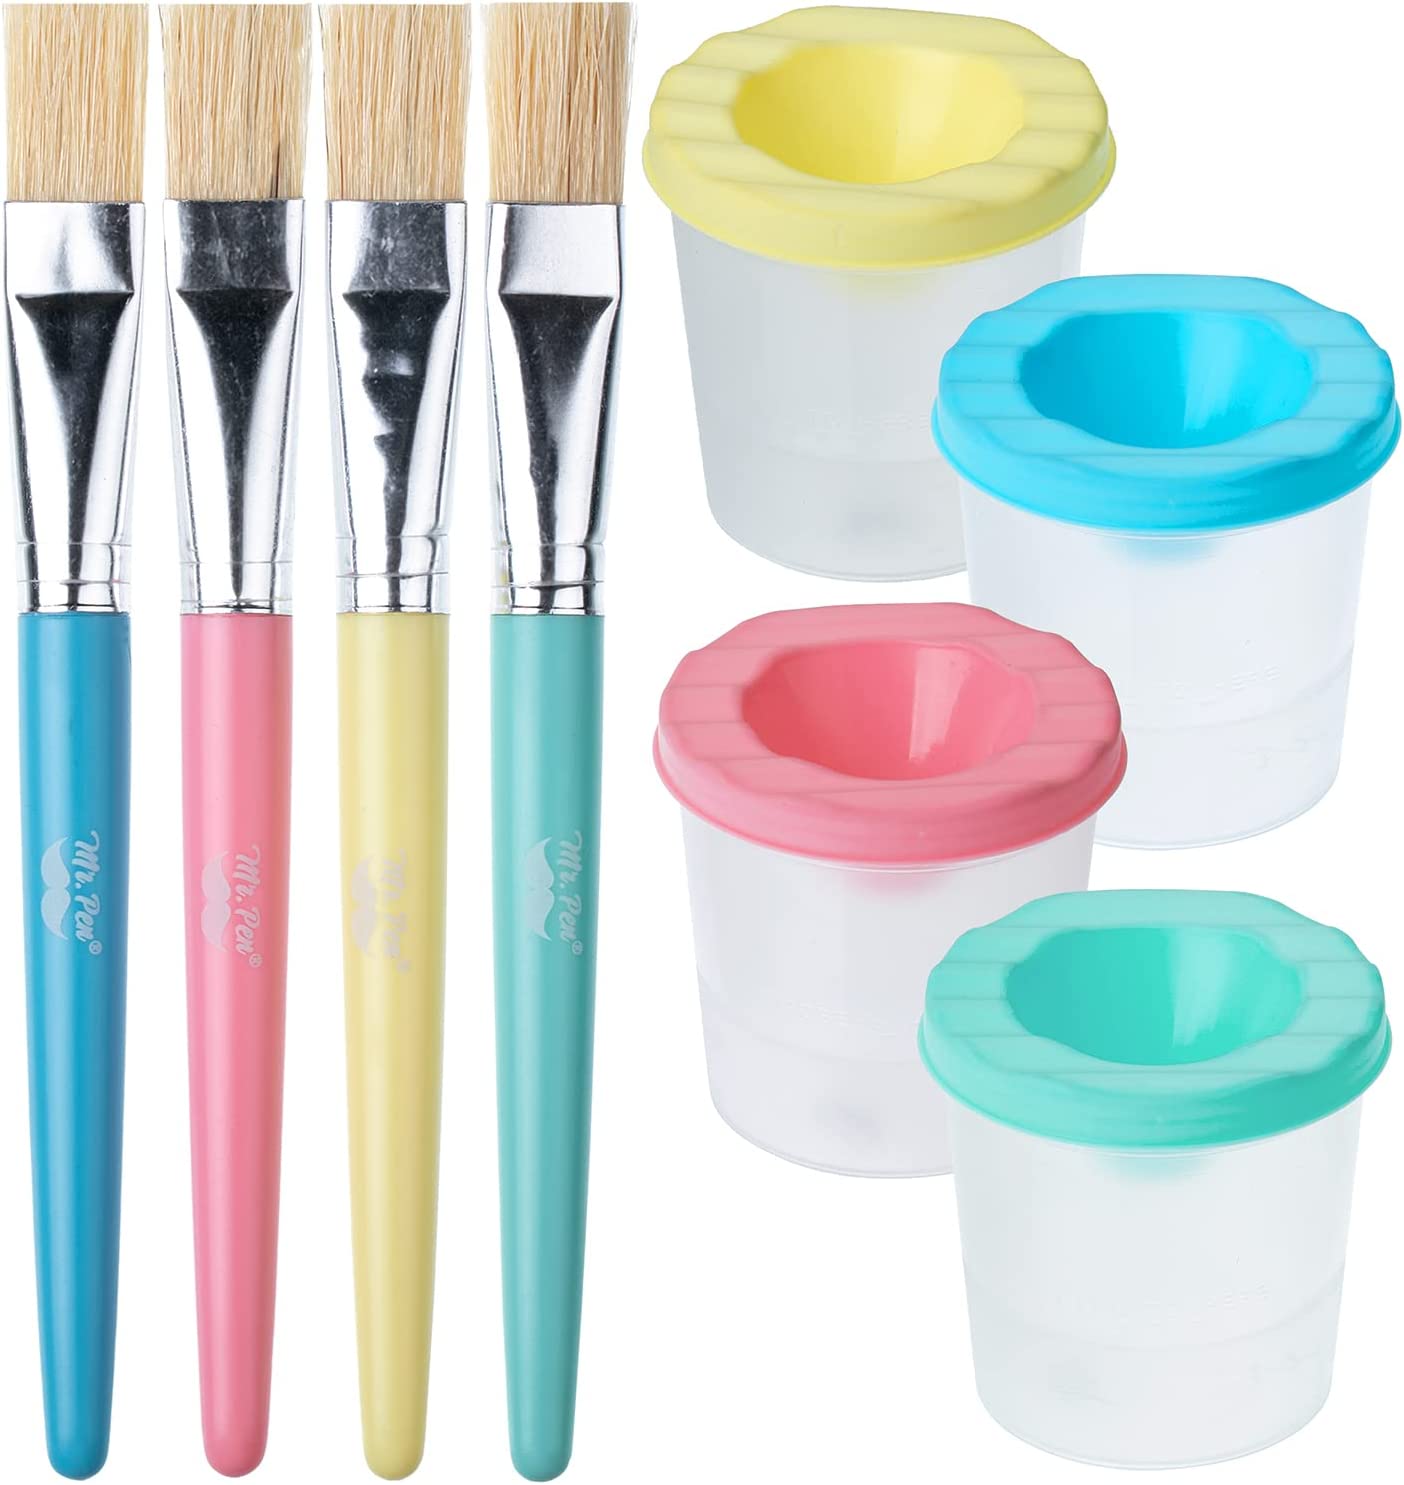 No Spill Paint Cups with Pastel Colored Lids, 4 pcs with 4 Paint Brushes, Paint Containers with Lids, Paint Cups with Lids for Kids, Paint Cups for Painting, Spill Proof Paint Cups for Kids